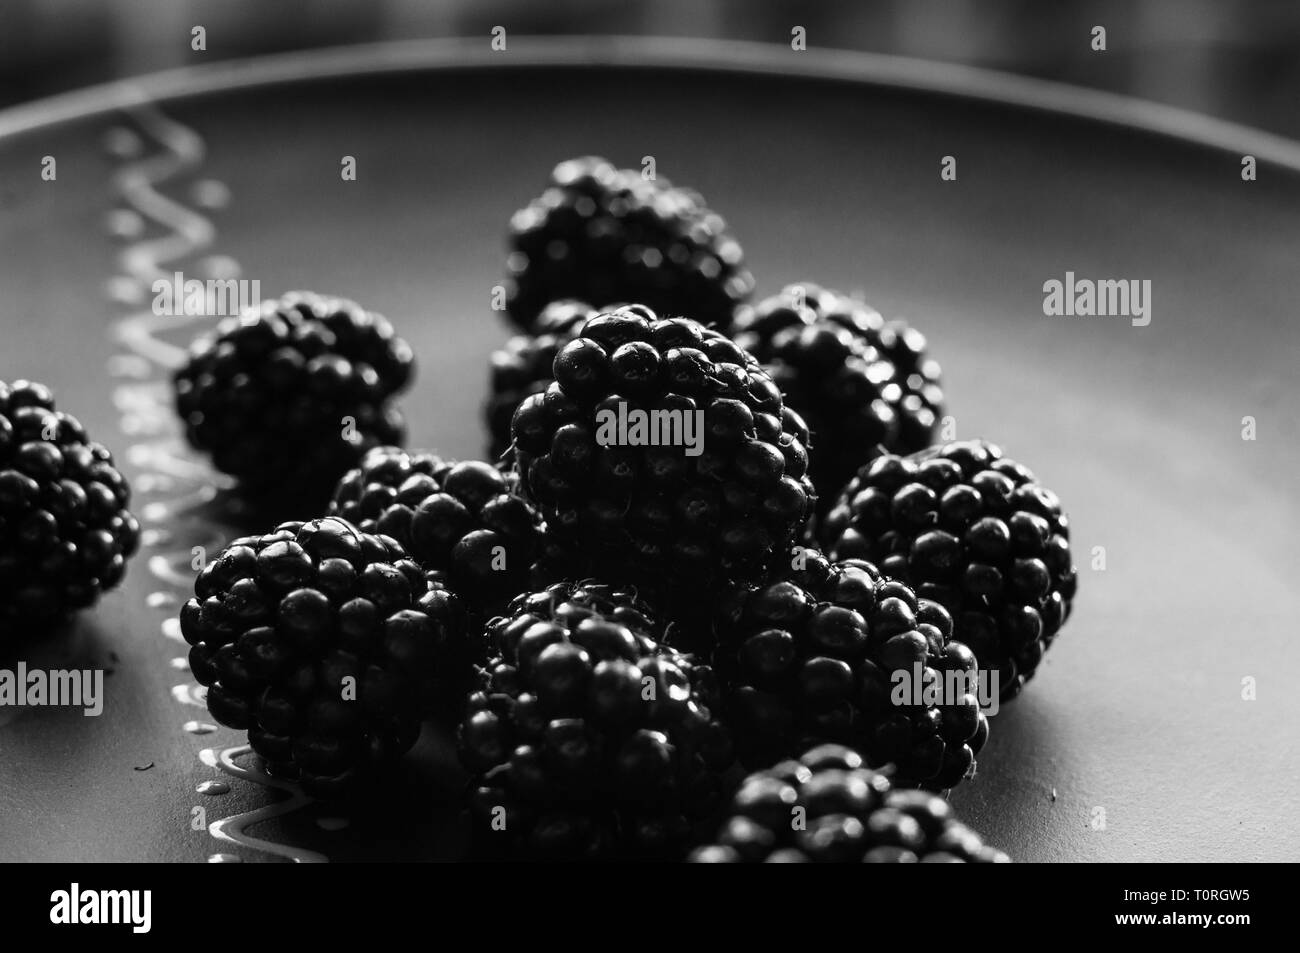 large juicy fresh blackberry berries on a ceramic plate, close-up Stock Photo